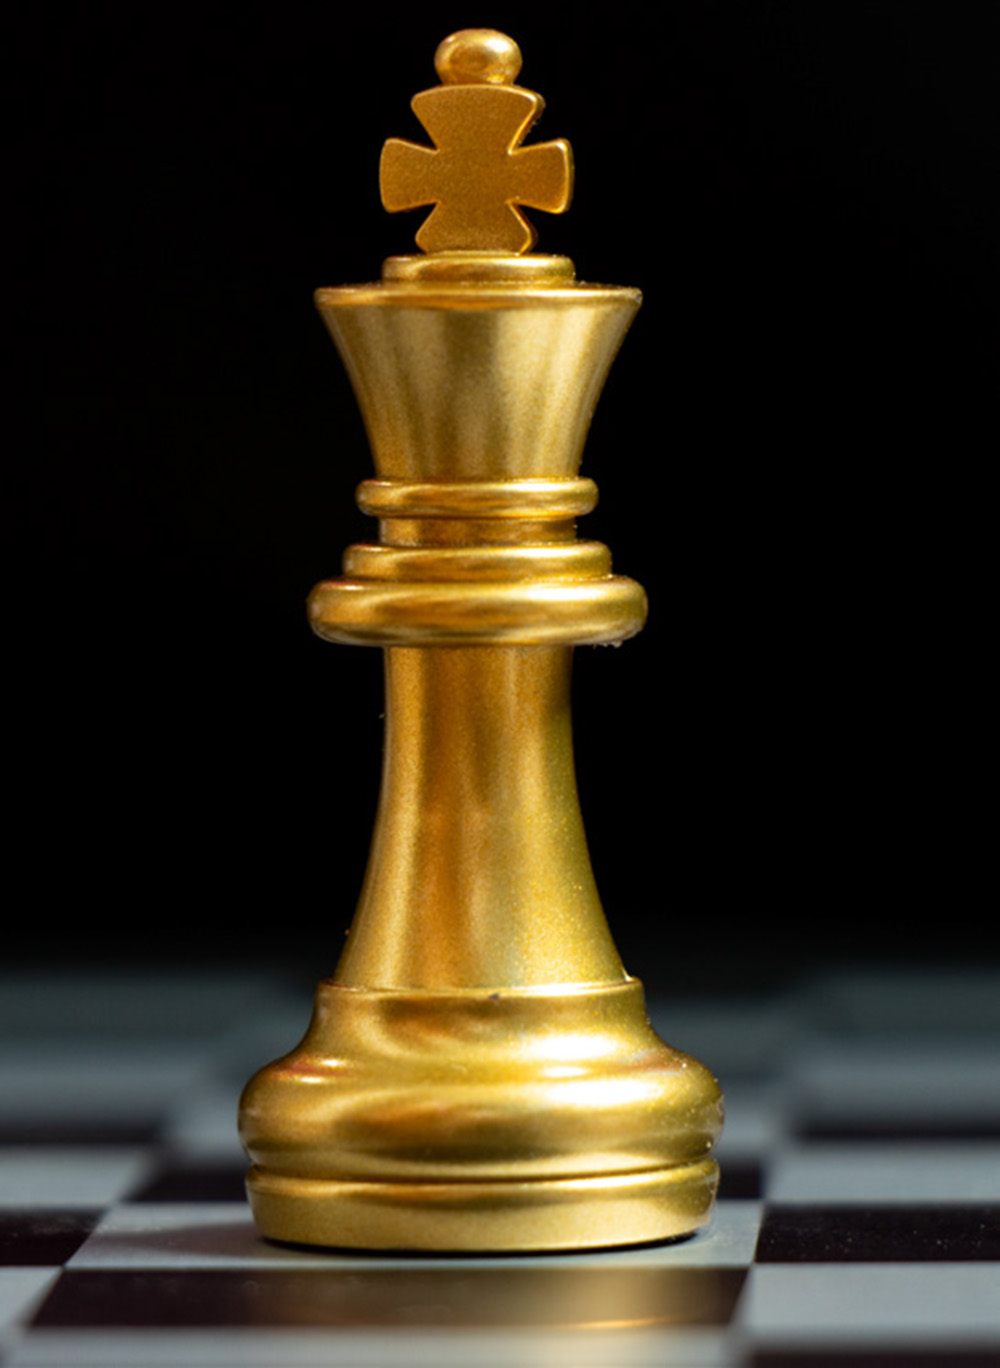 Gold king chess piece stand on black background (Concept for leadership, unique)